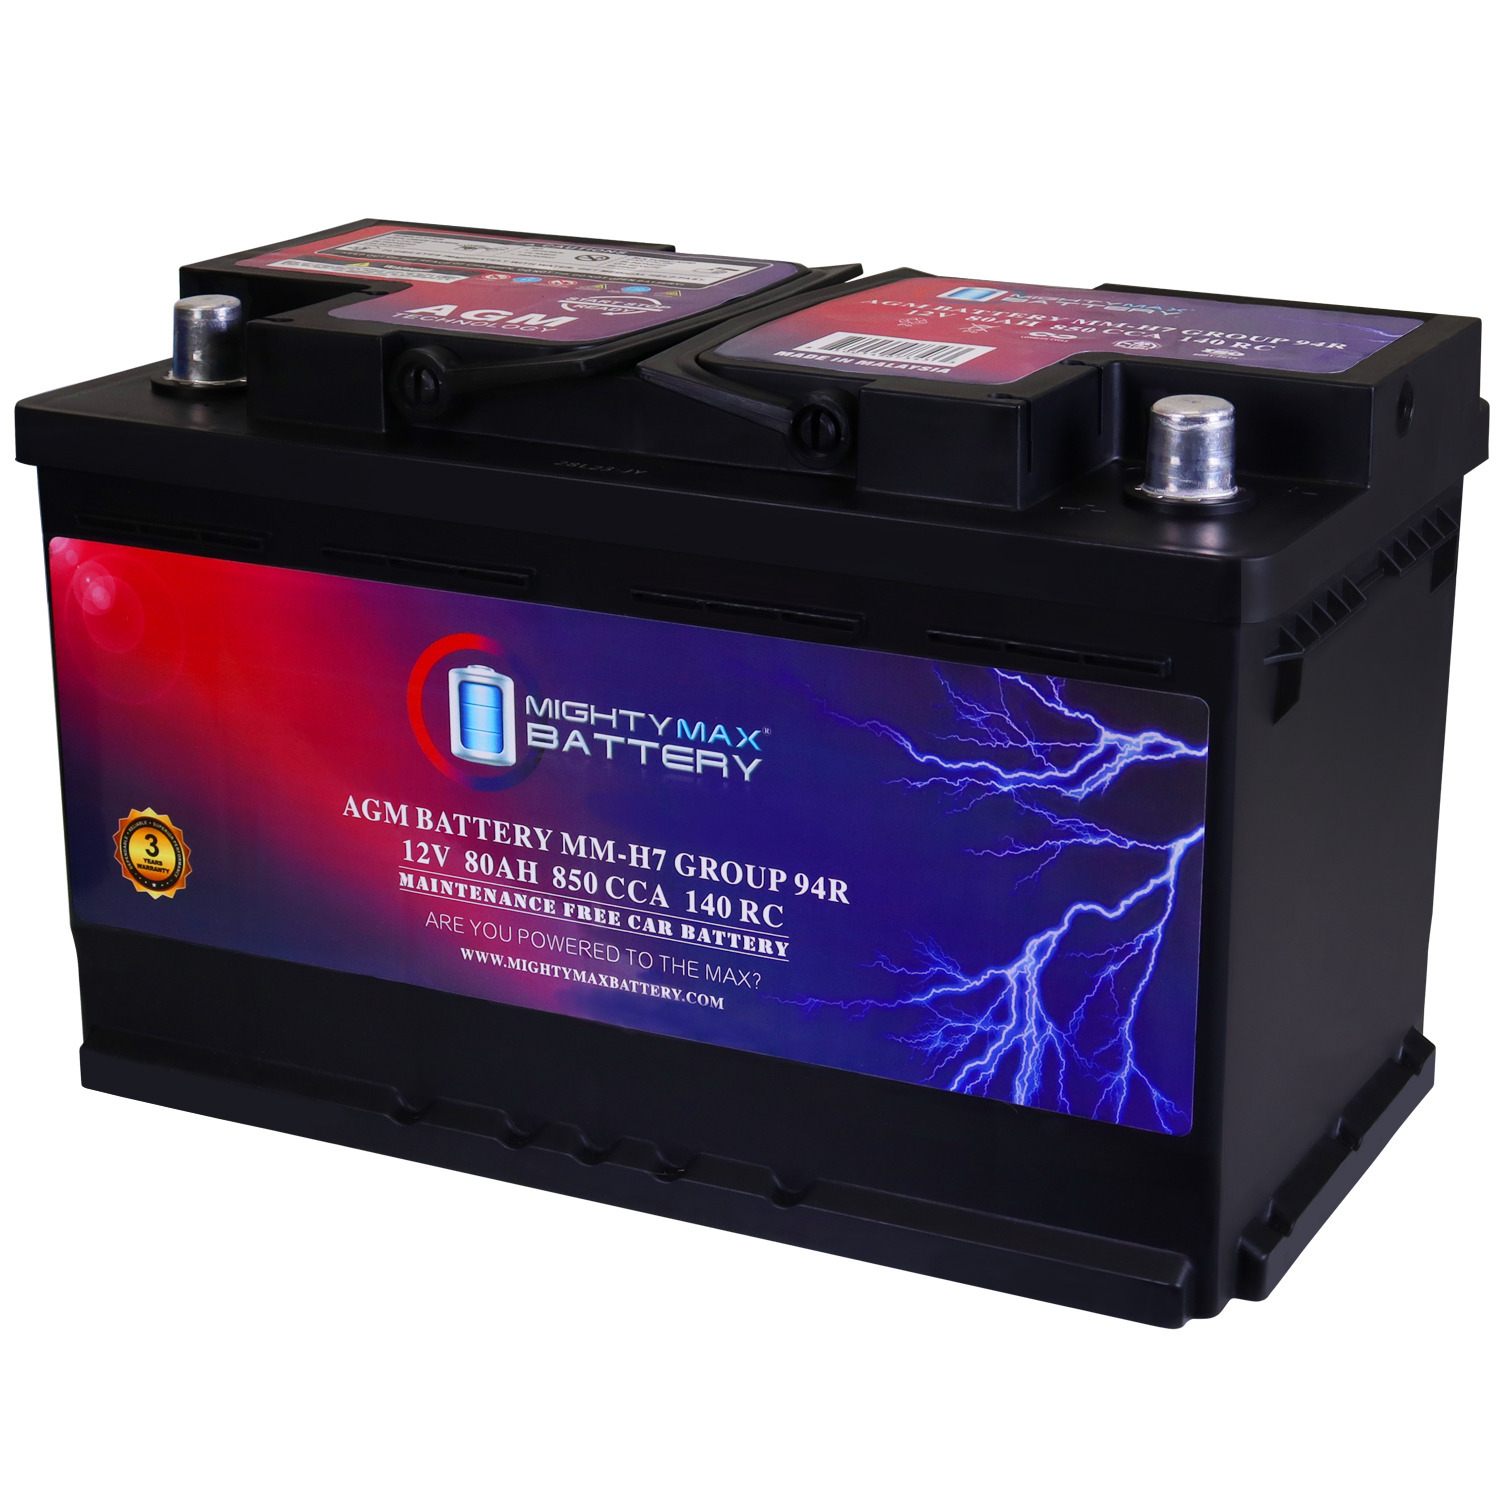 MM-H7 Group 94R 12V 80AH 140RC 850 CCA Replacement Battery Compatible with BMW 323i 99-00